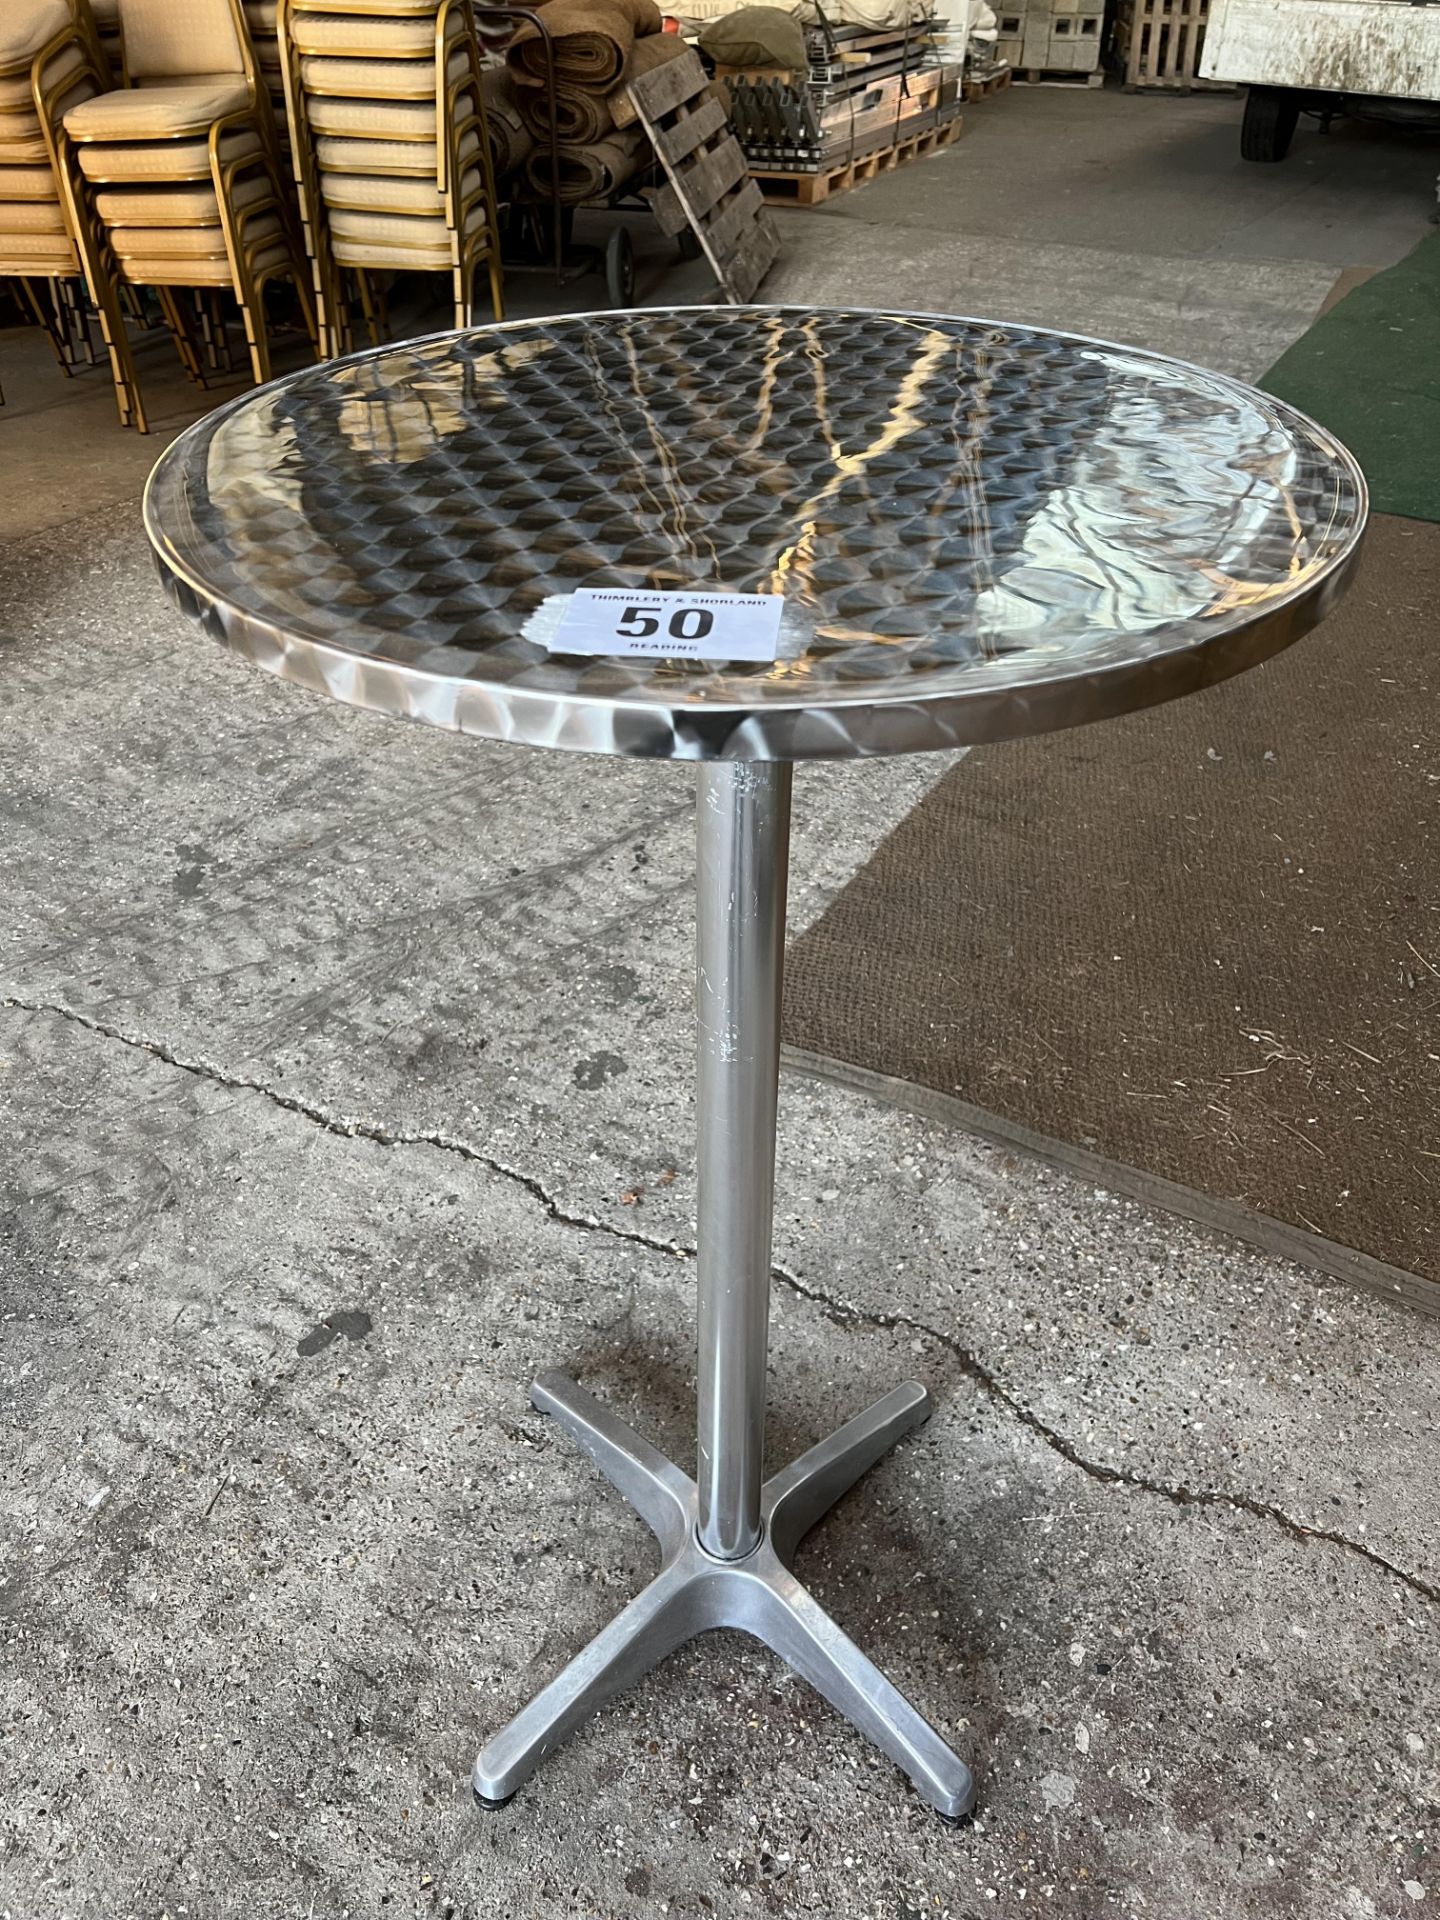 35 aluminium poseur tables. This lot is subject to VAT